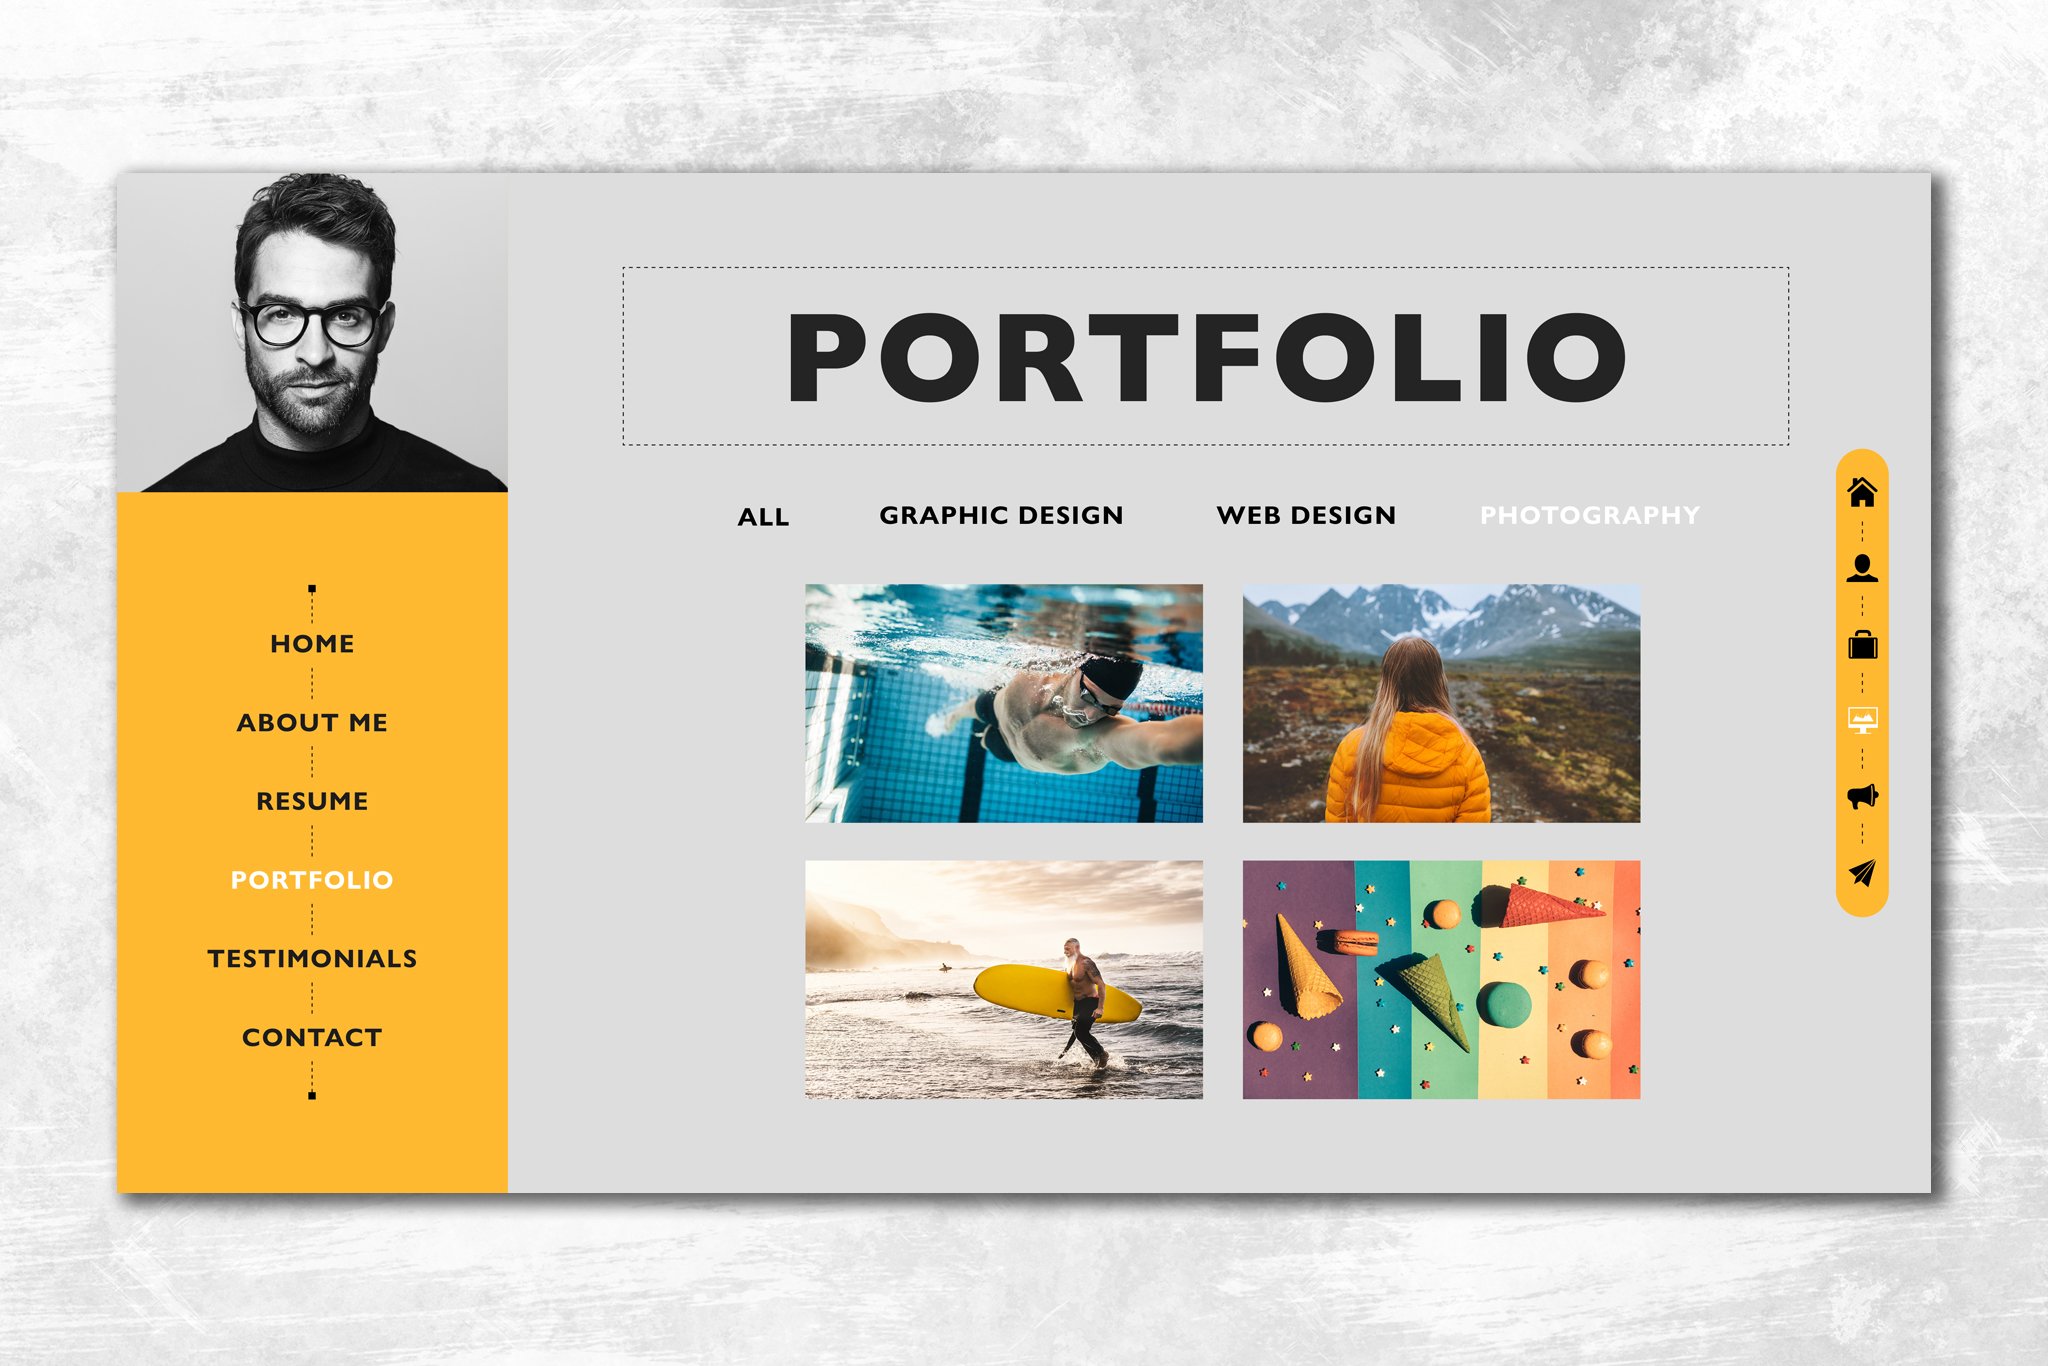 Website page with a man holding a surfboard.